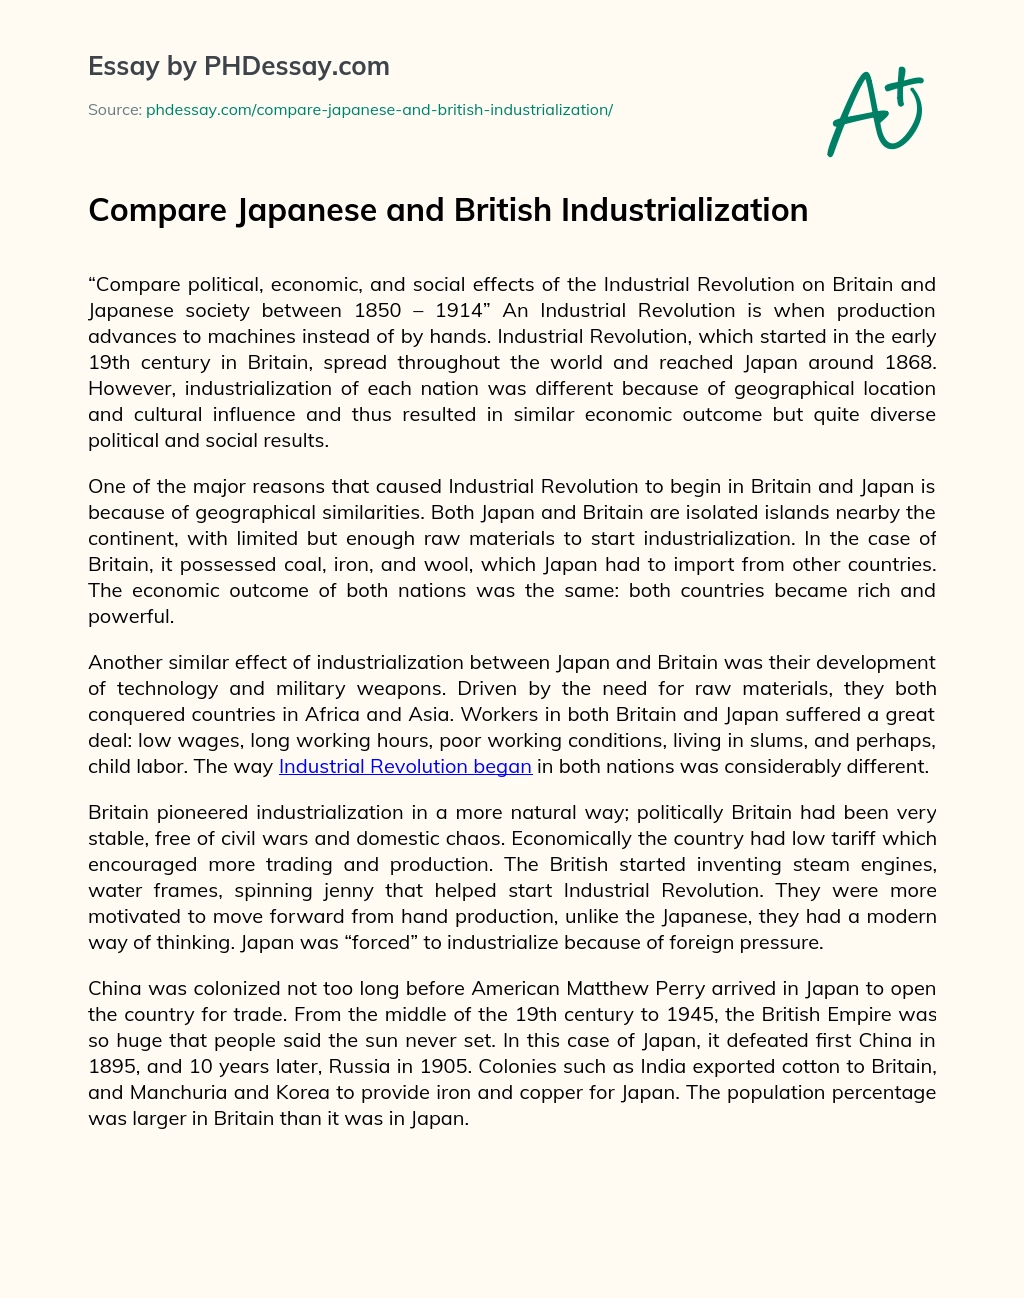 Compare Japanese and British Industrialization essay